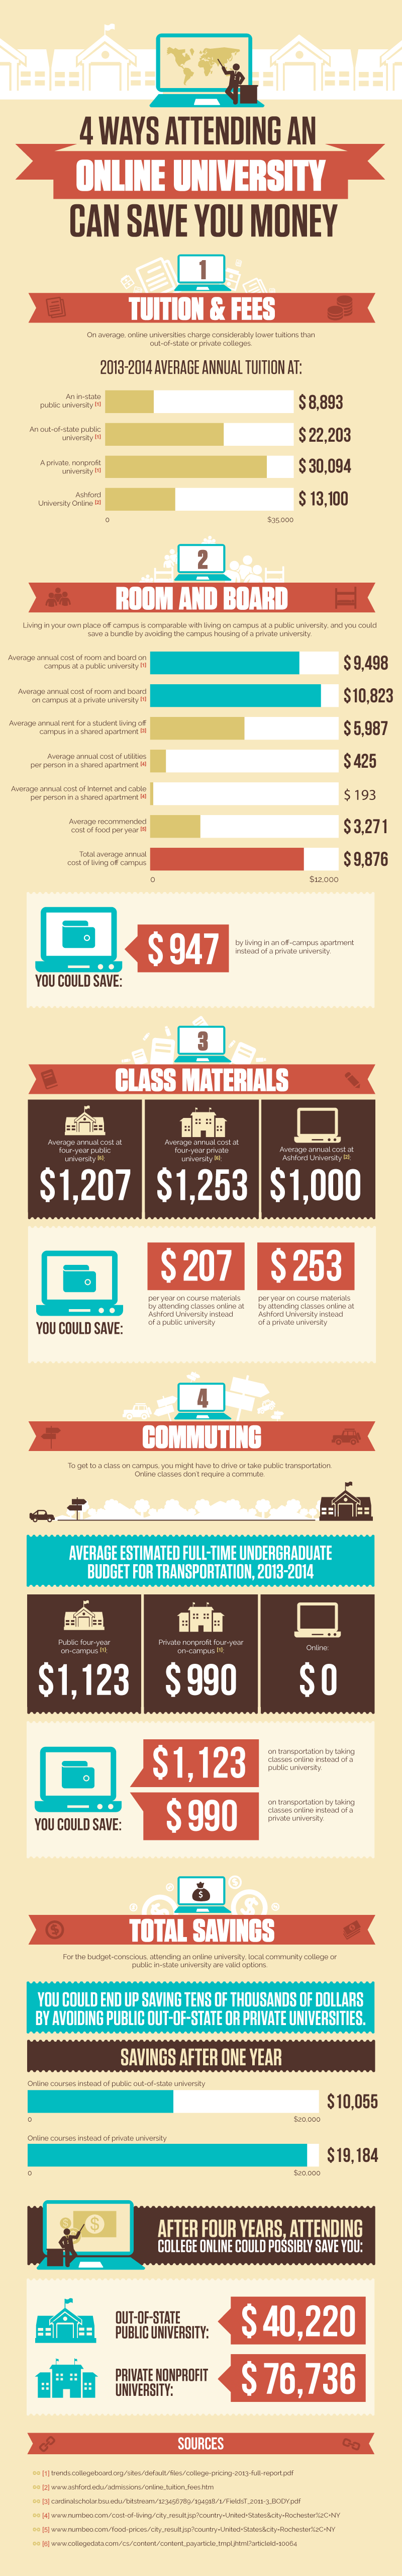 How Online Education Can Save You Money Infographic